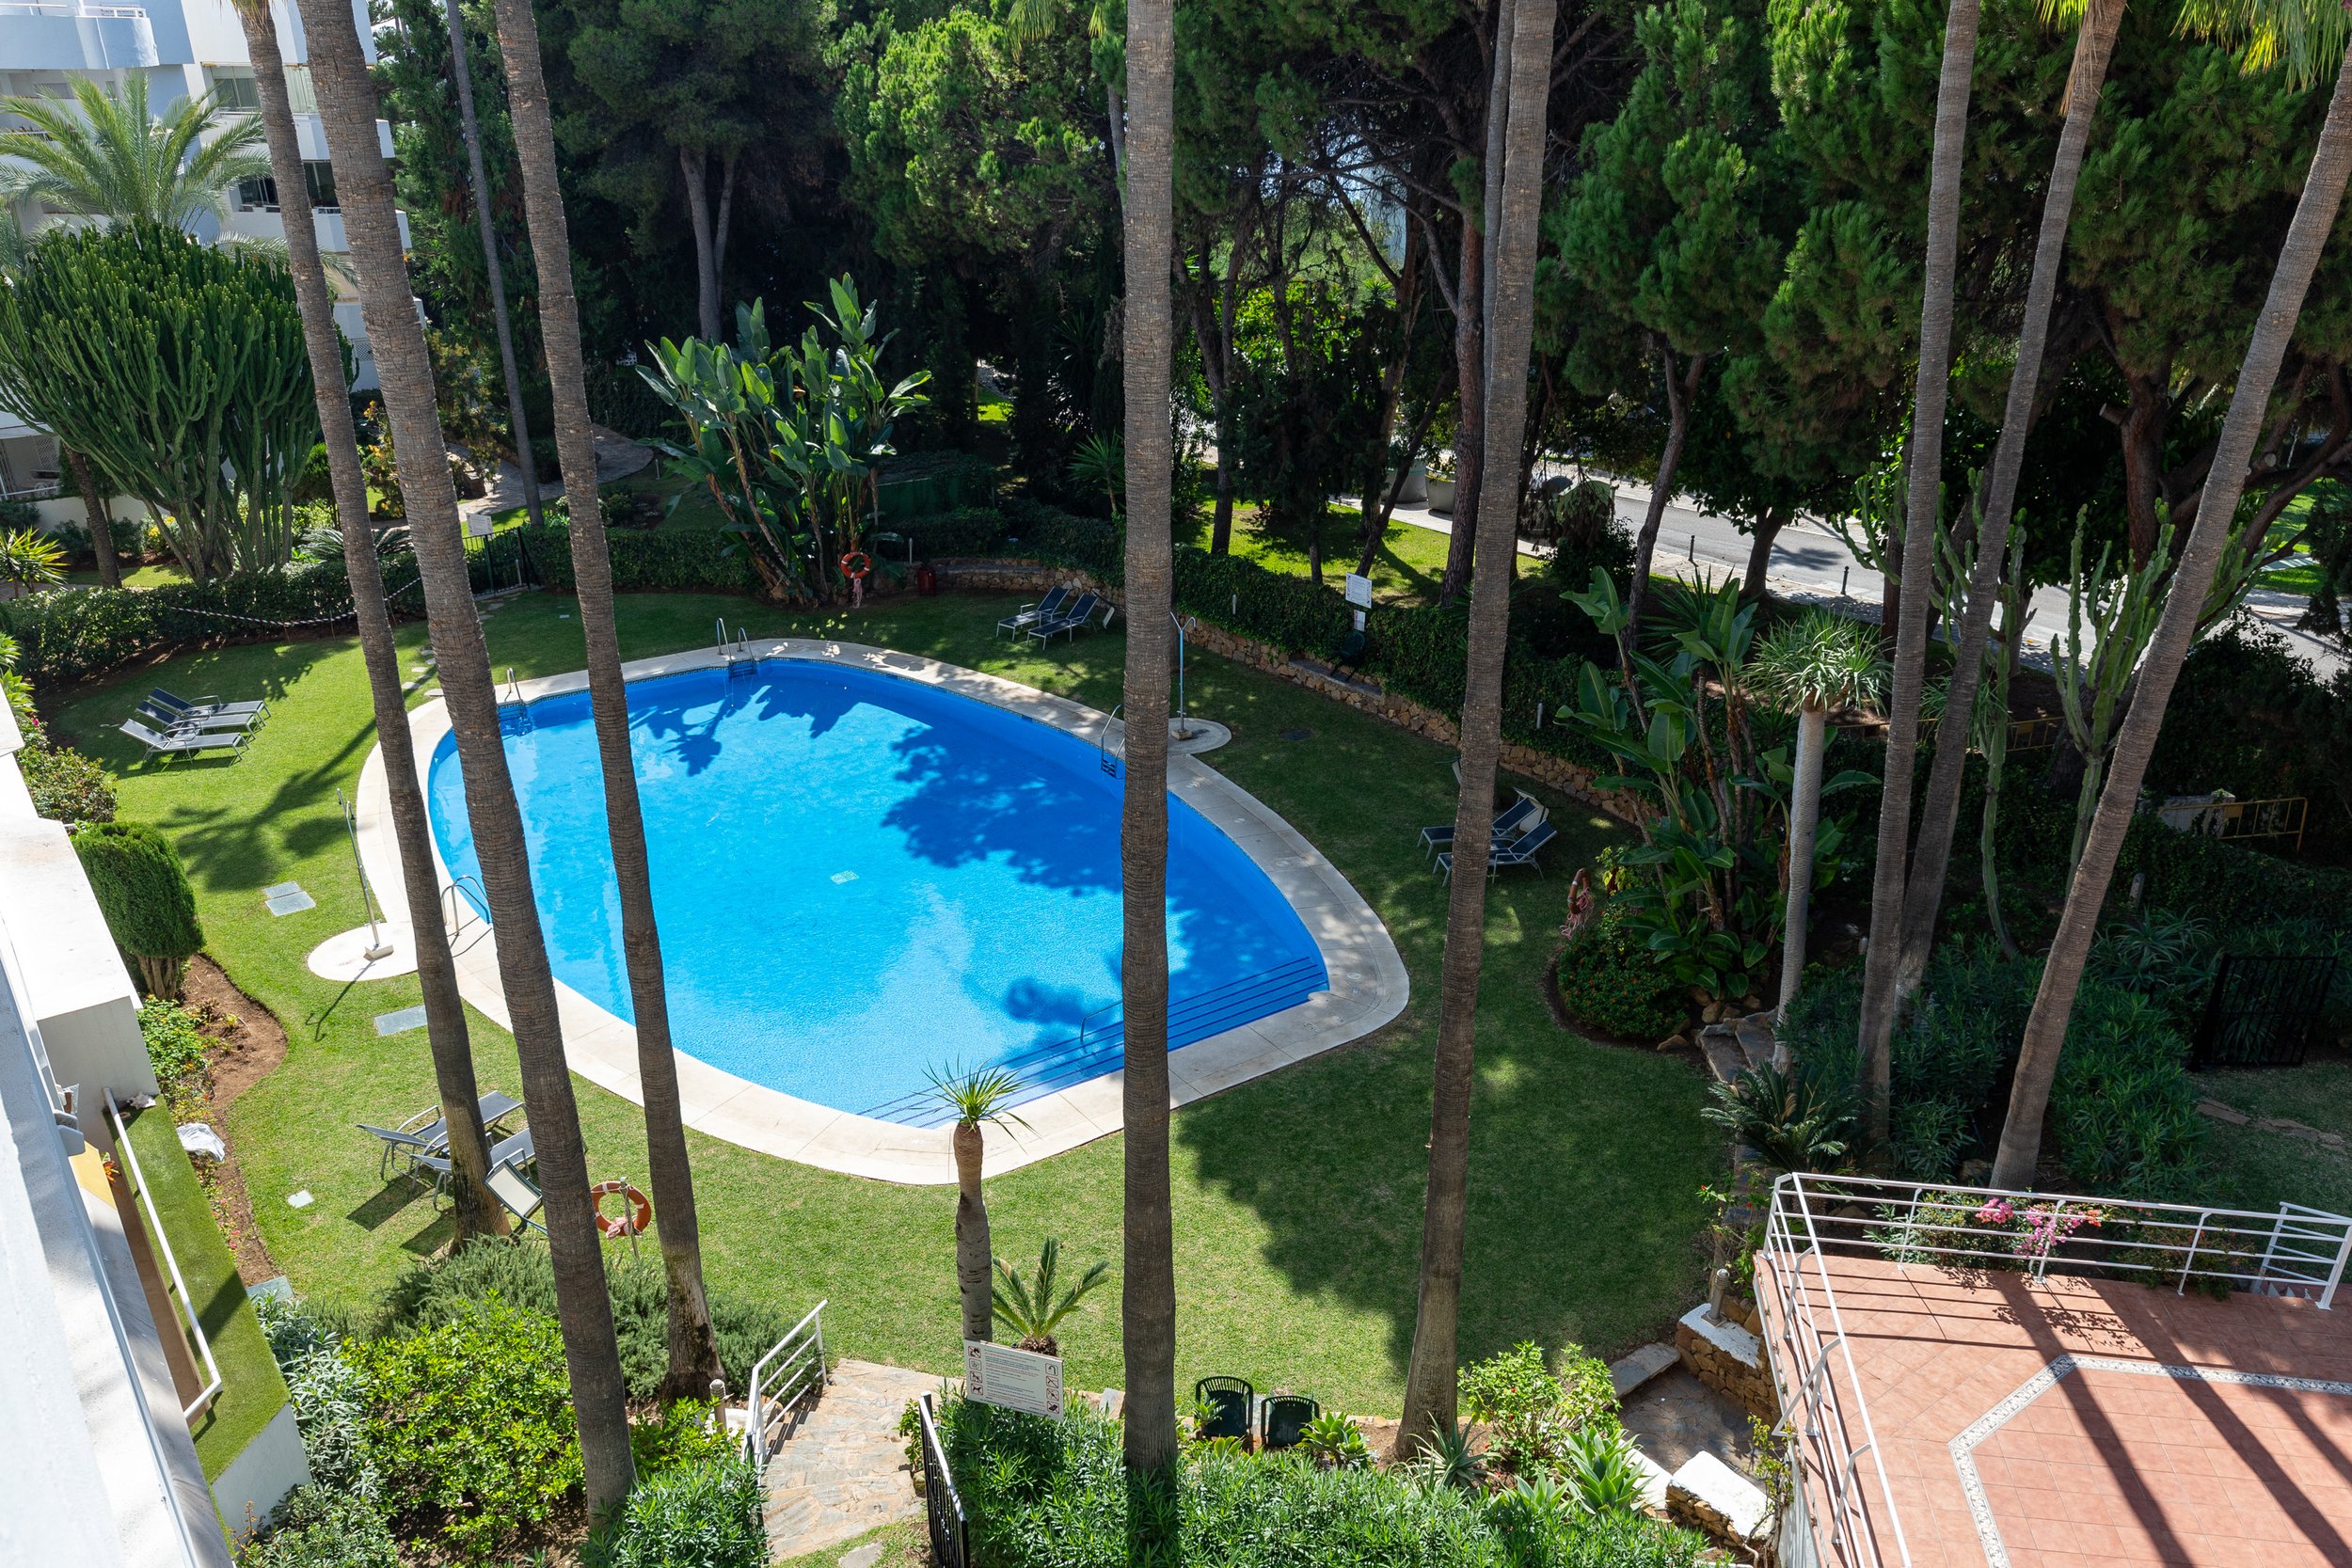 for-sale-renovated-three-bedroom-duplex-penthouse-rio-real-marbella-fs8795-12.jpg